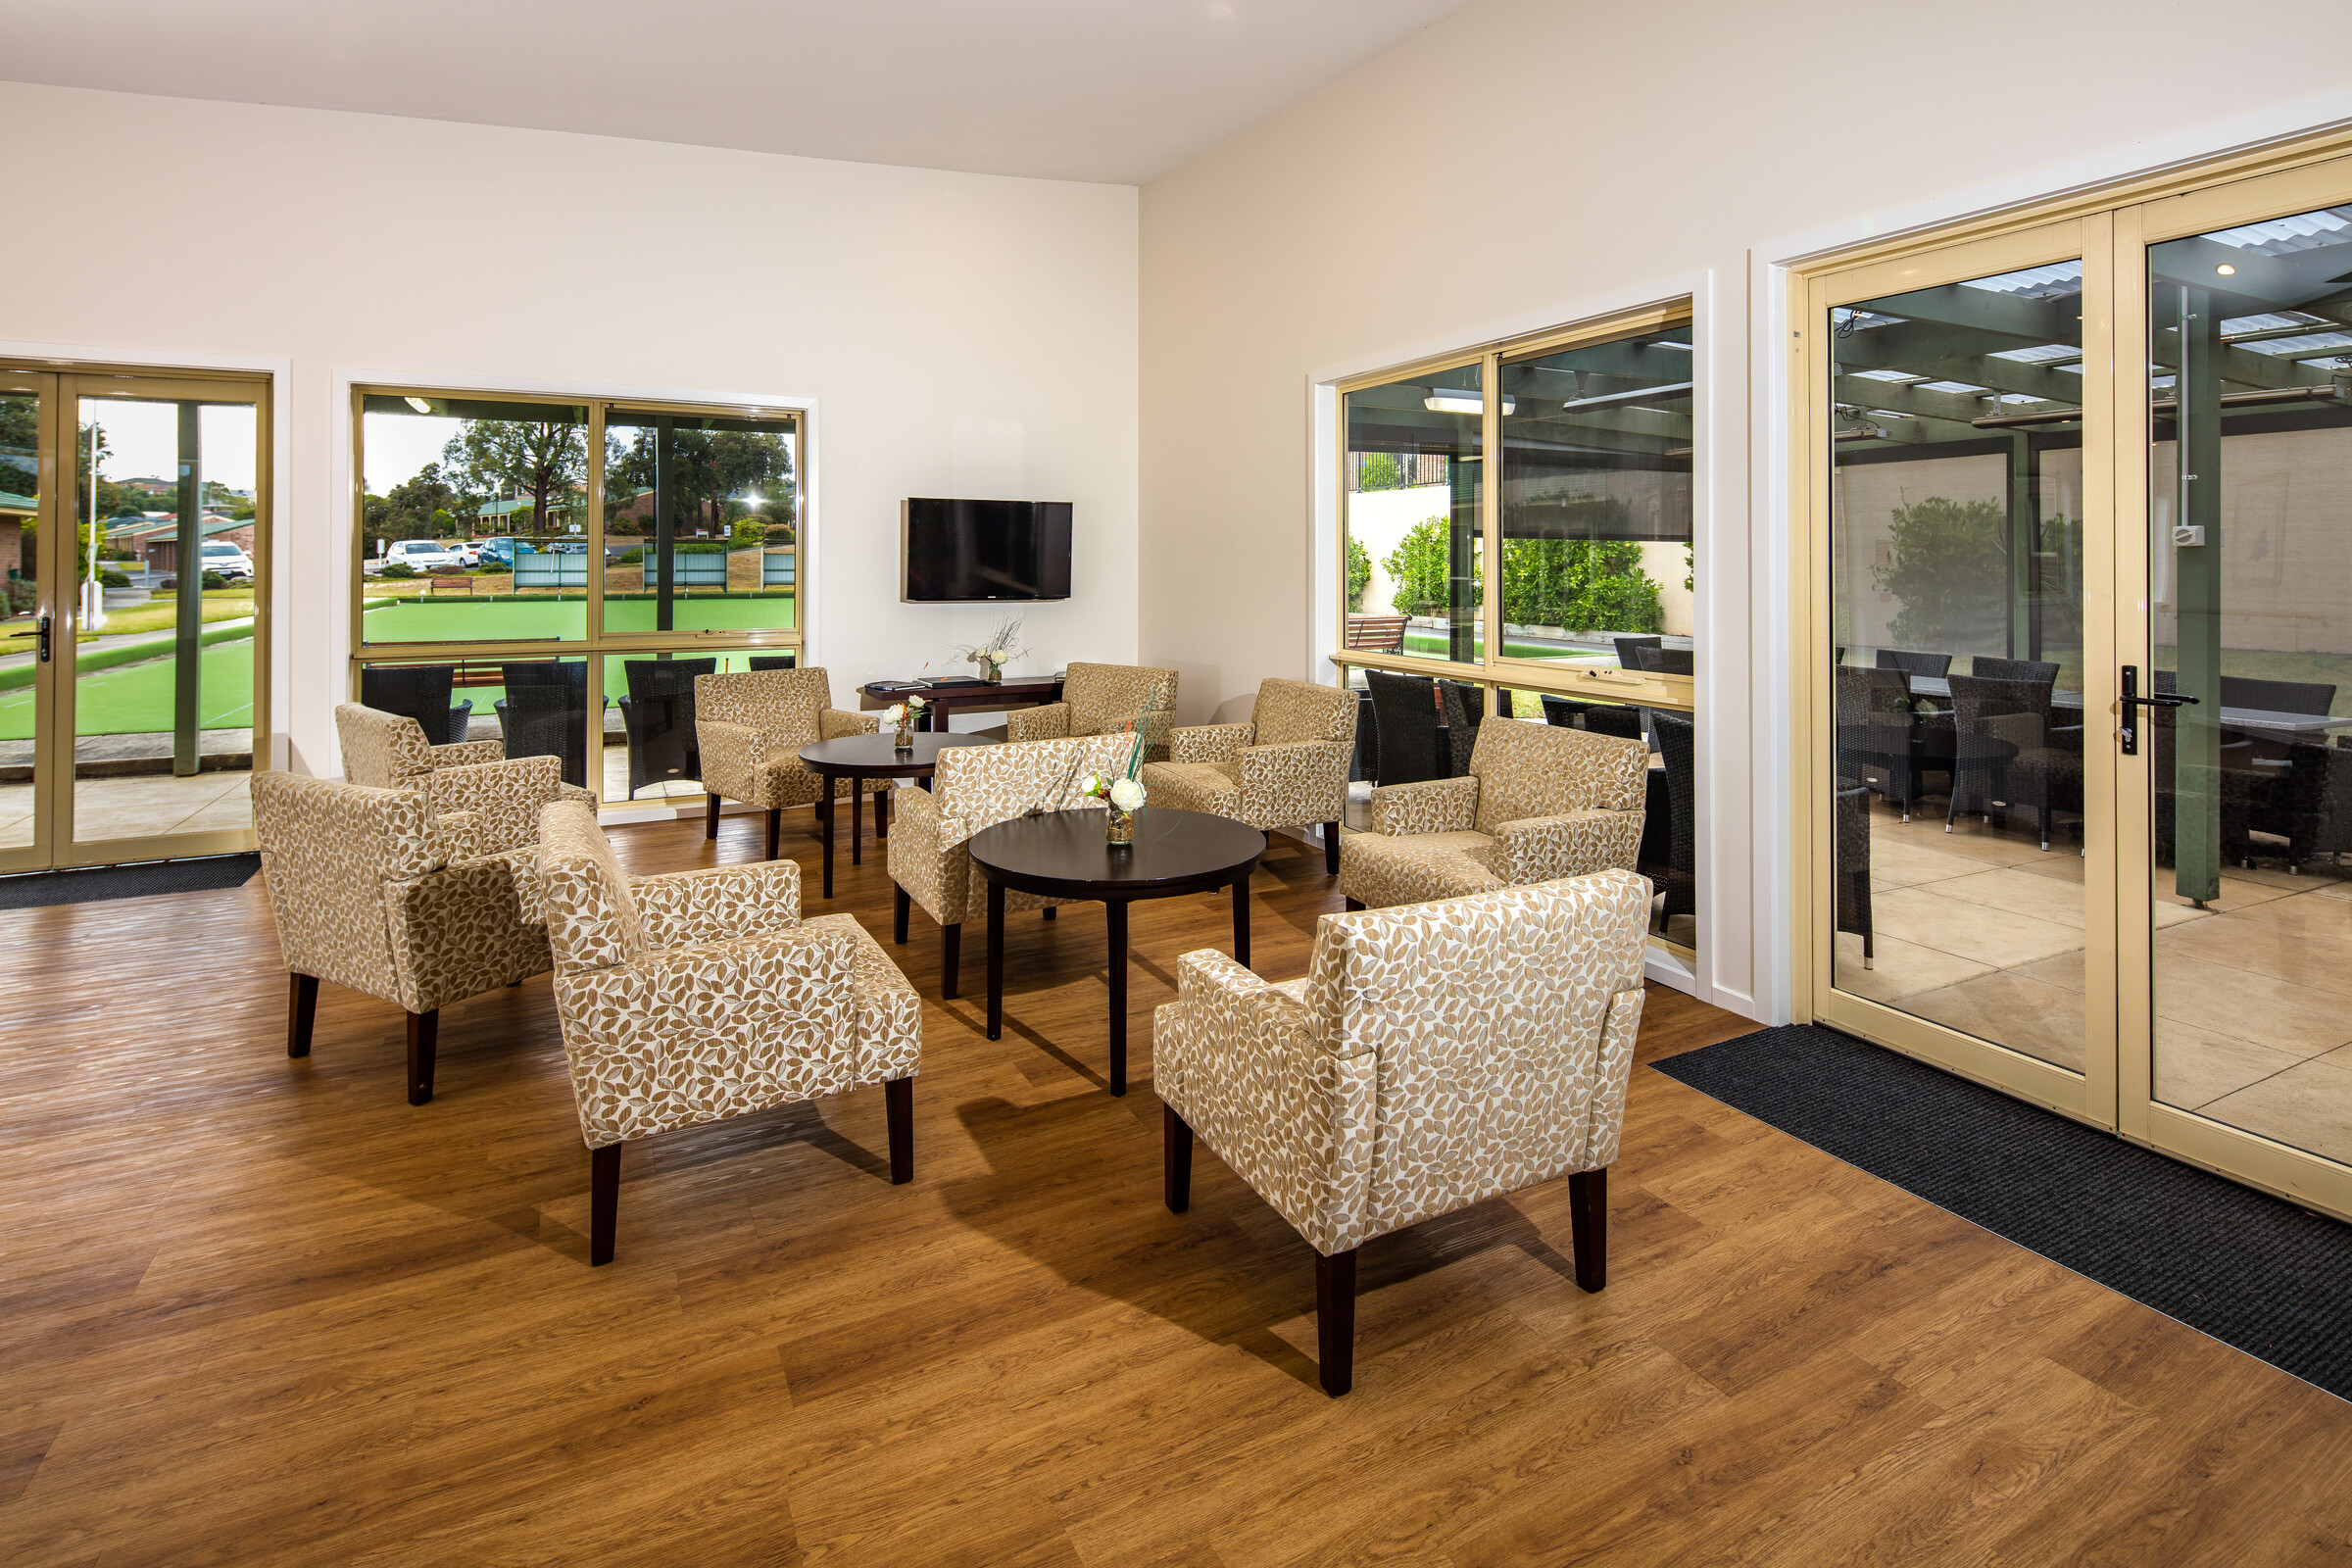 Meadowvale Village lounge area with seating with window outlook to bowling green and outdoor terrace